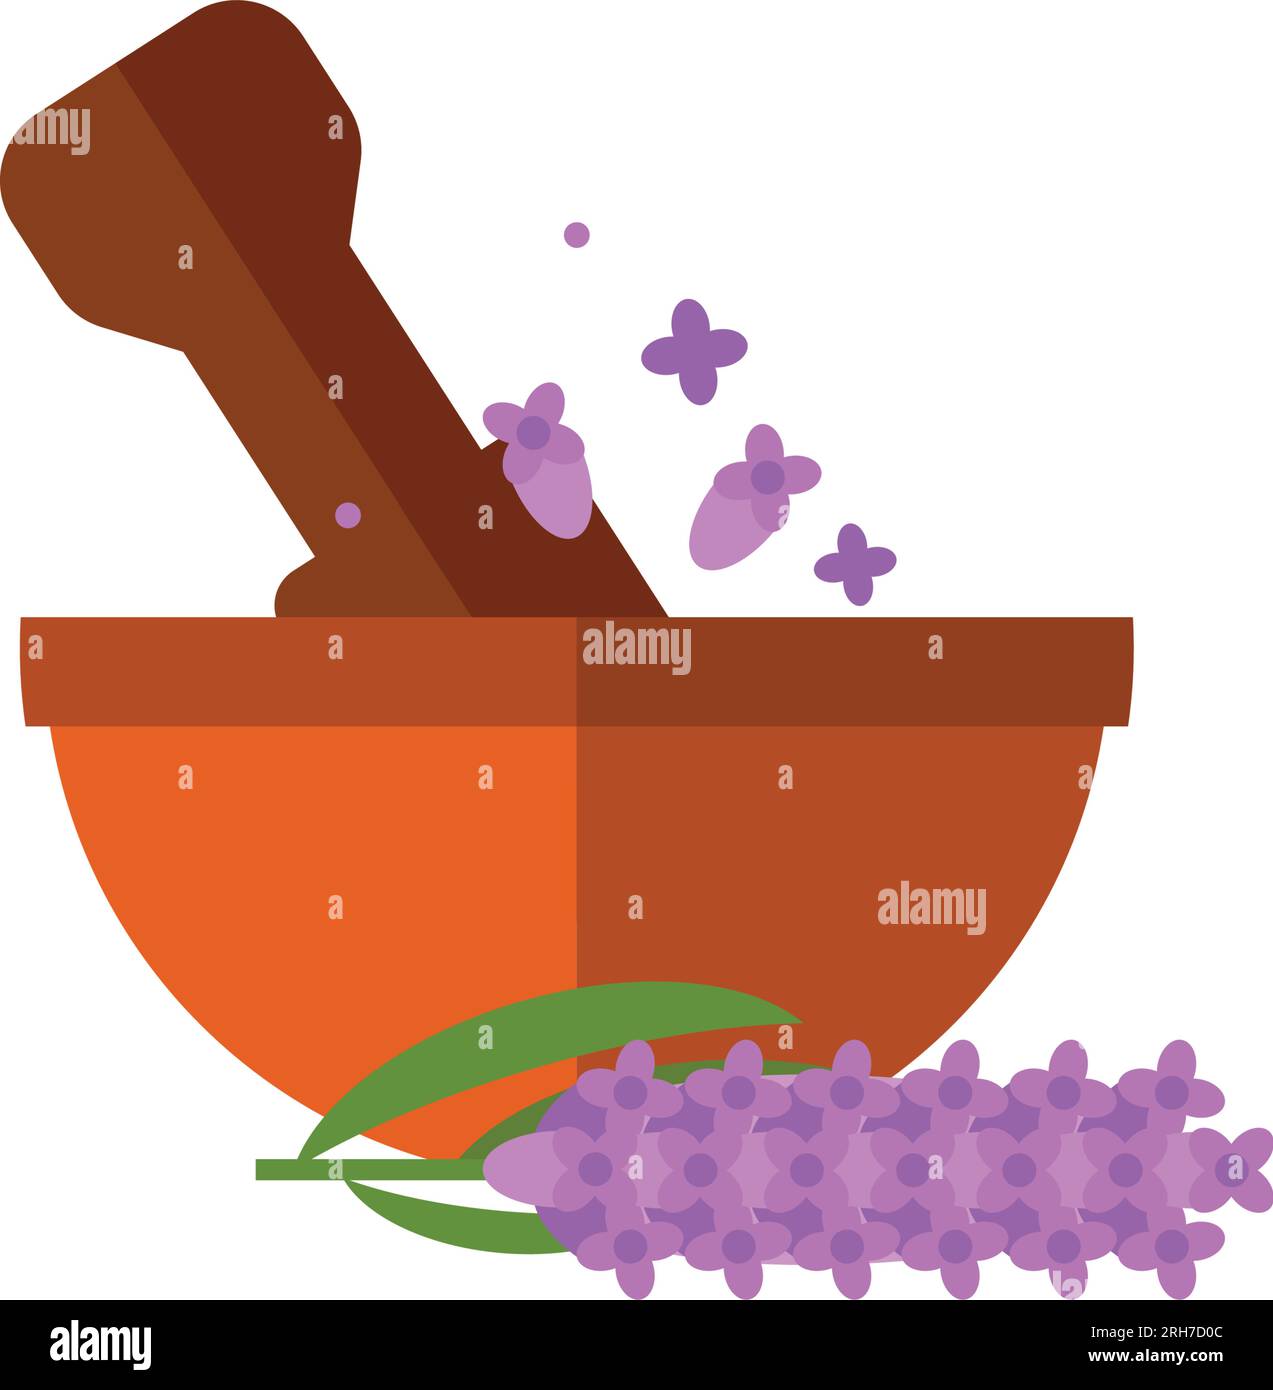 Pestle grinding flowers in mortar icon Stock Vector